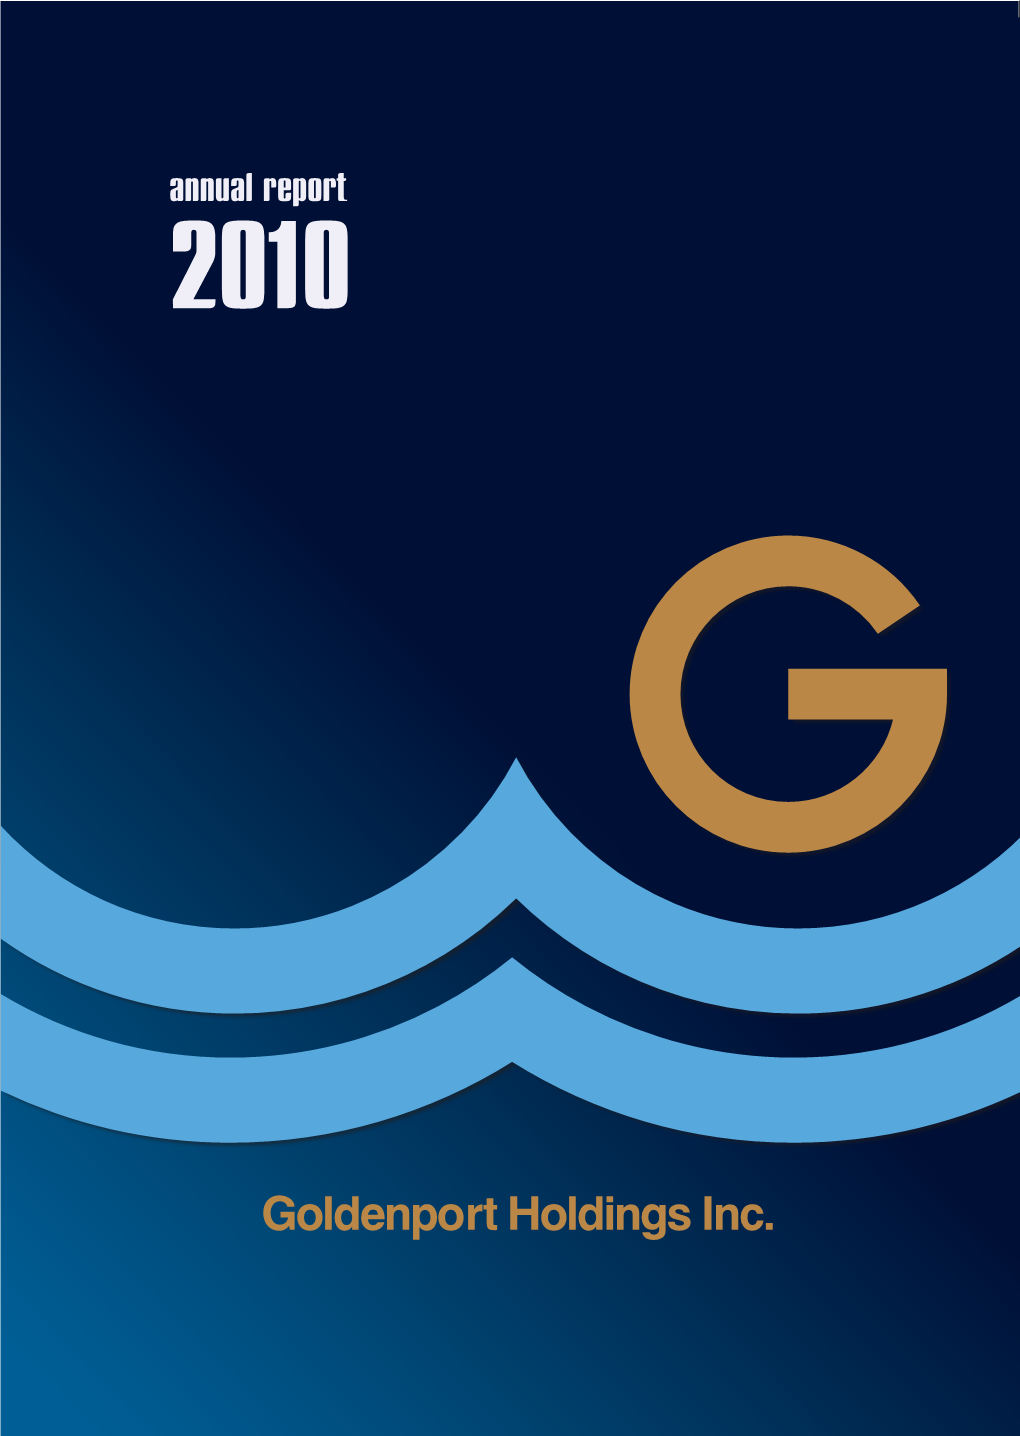 Goldenport Enters 2011 with All Its